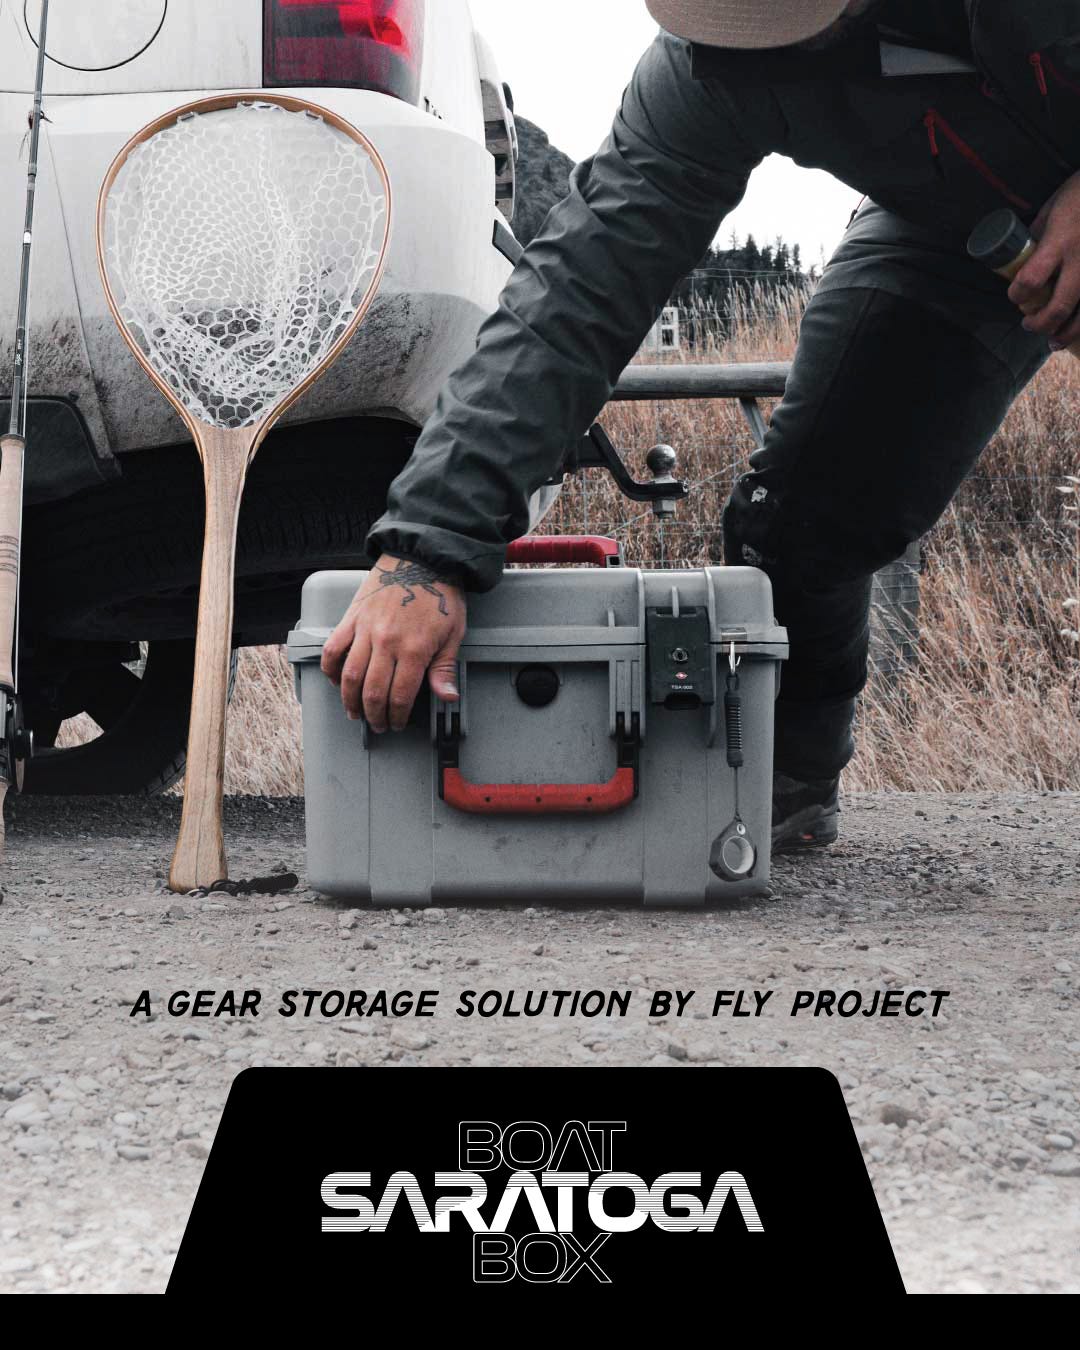 Introducing the Fly Project Saratoga Boat Box